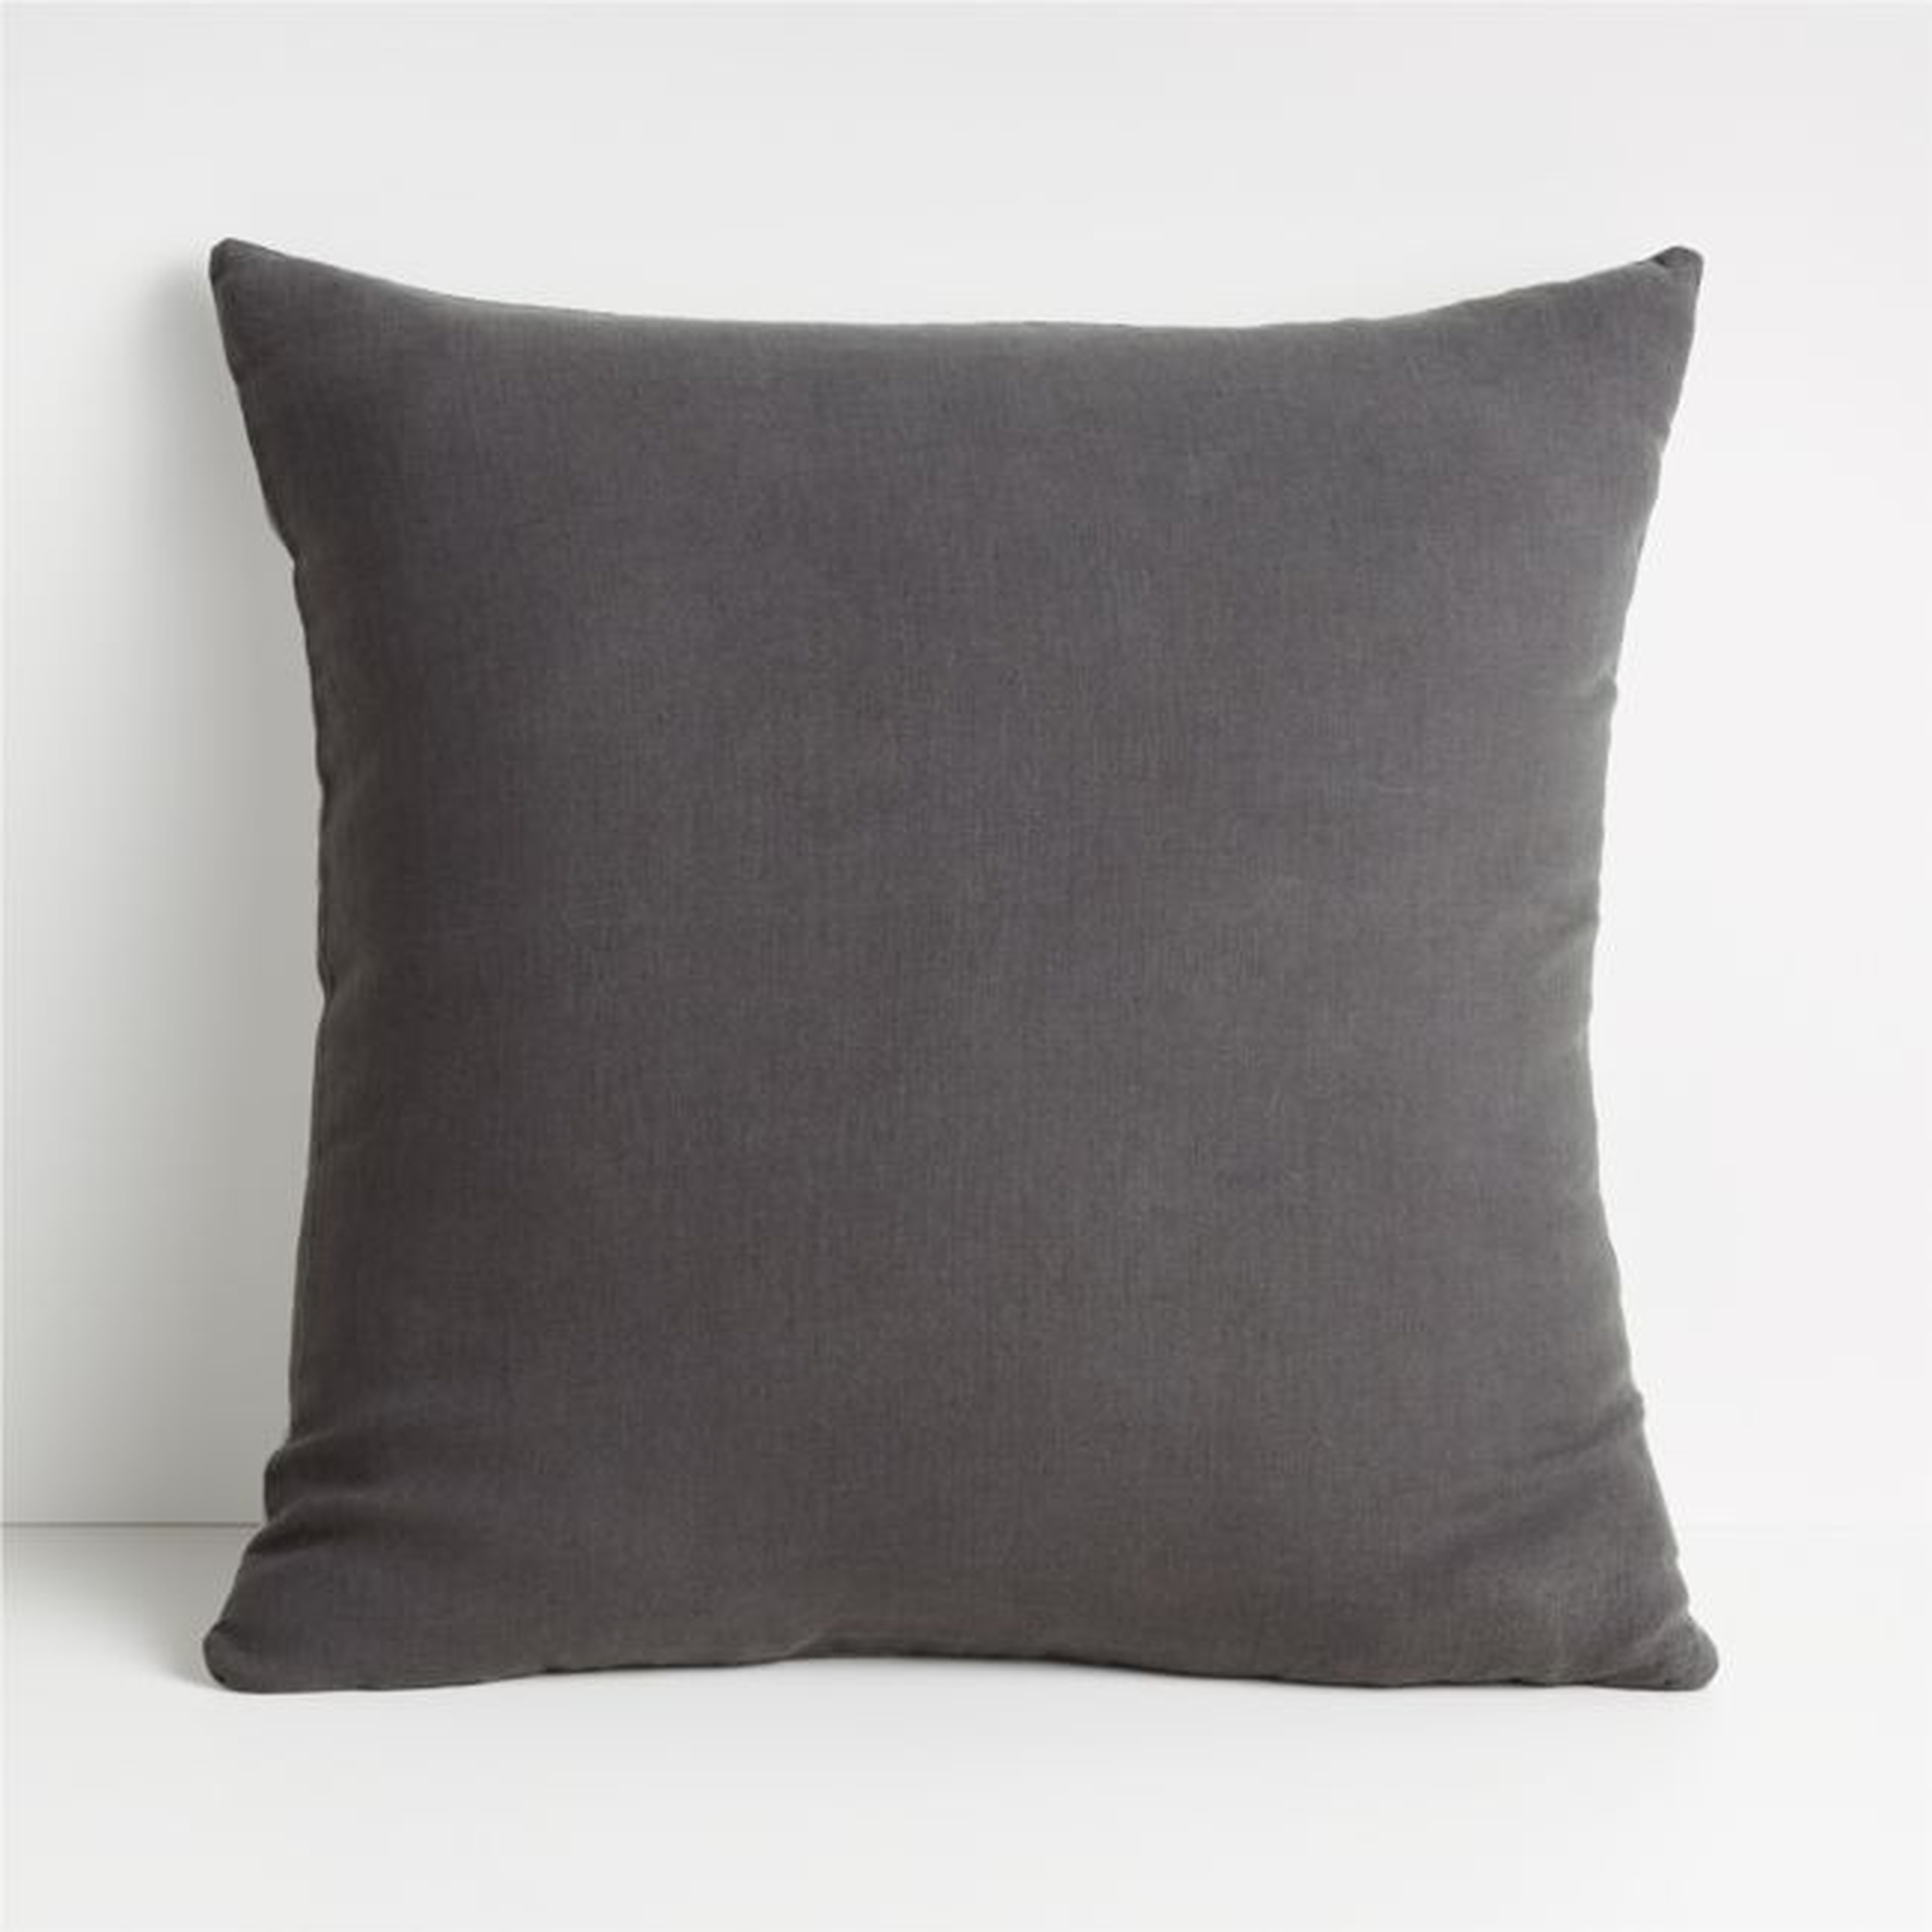 Parachute Linen Steel 20"x20" Throw Pillow Cover - Crate and Barrel